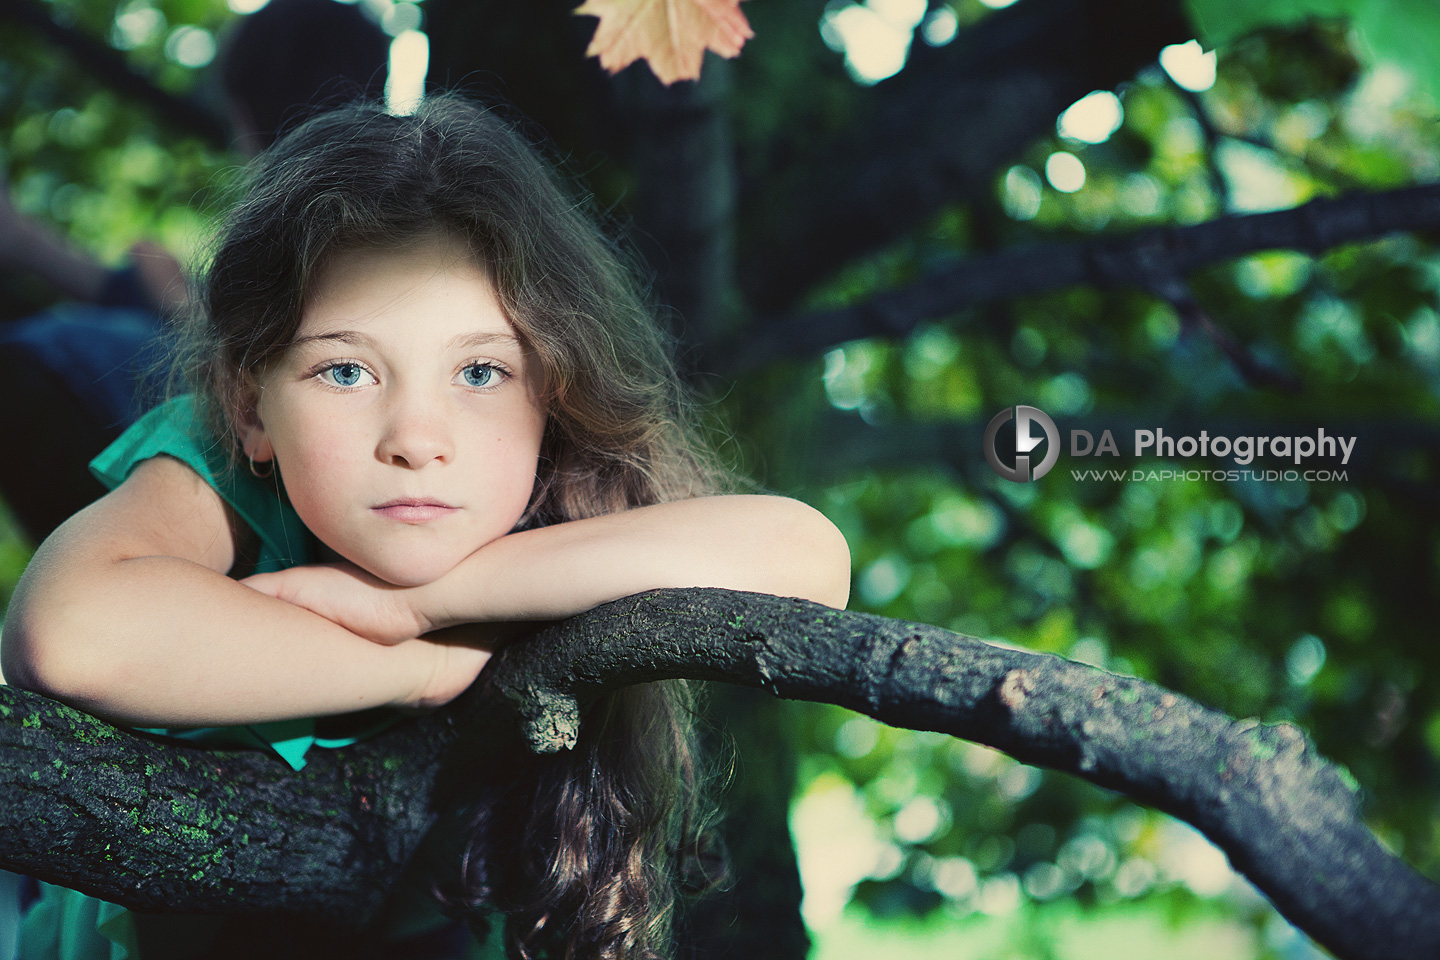 What could be more fun than taking pictures in a tree? - Lifestyle Photography On Location